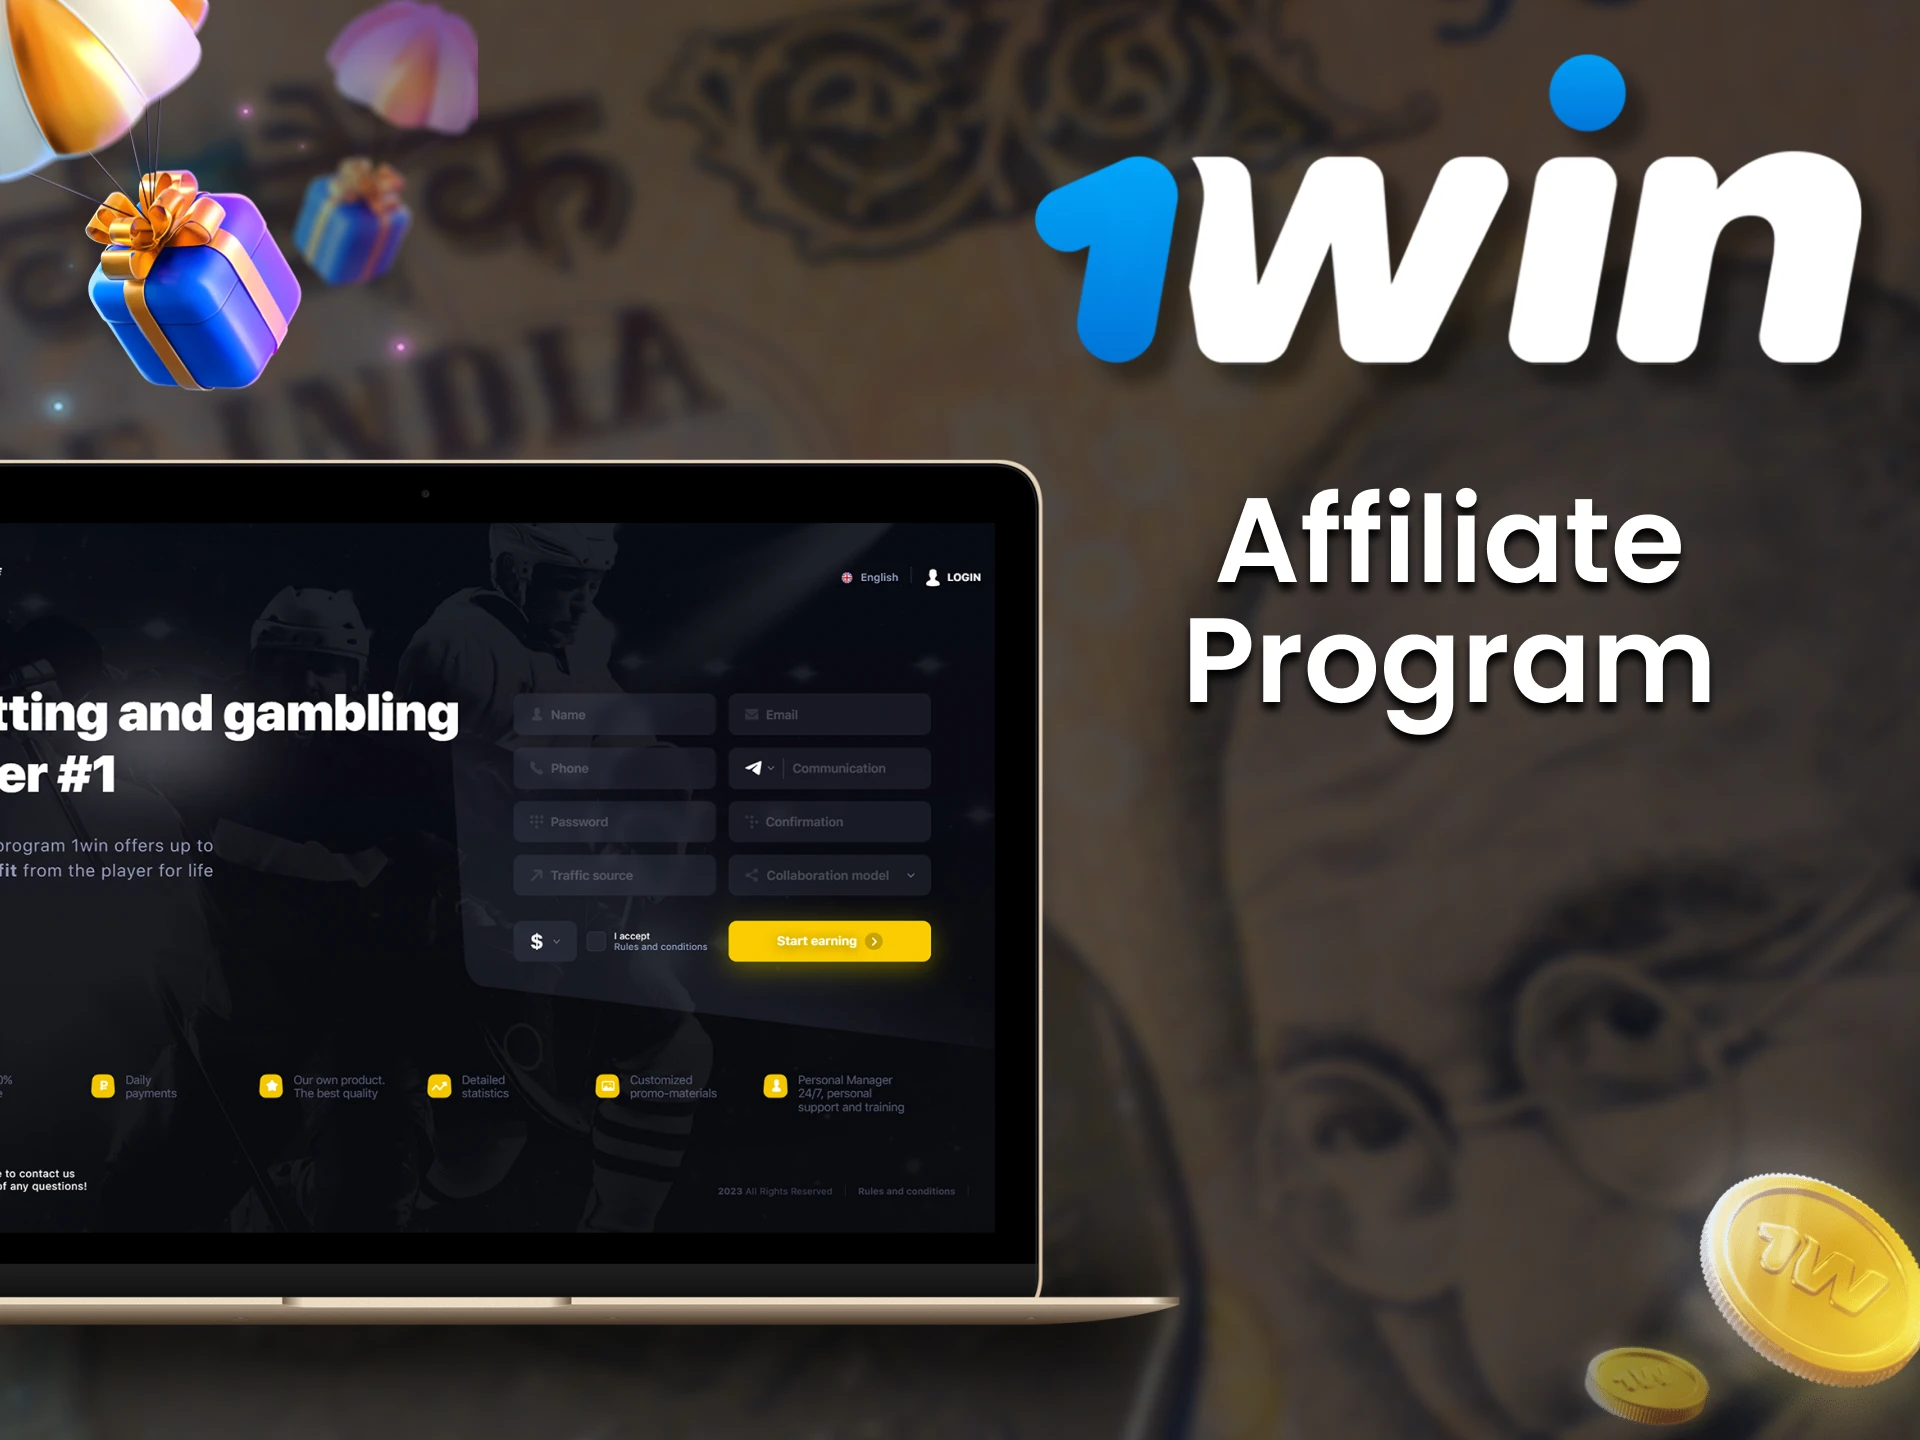 Join the affiliate program and increase your profit from 1win.